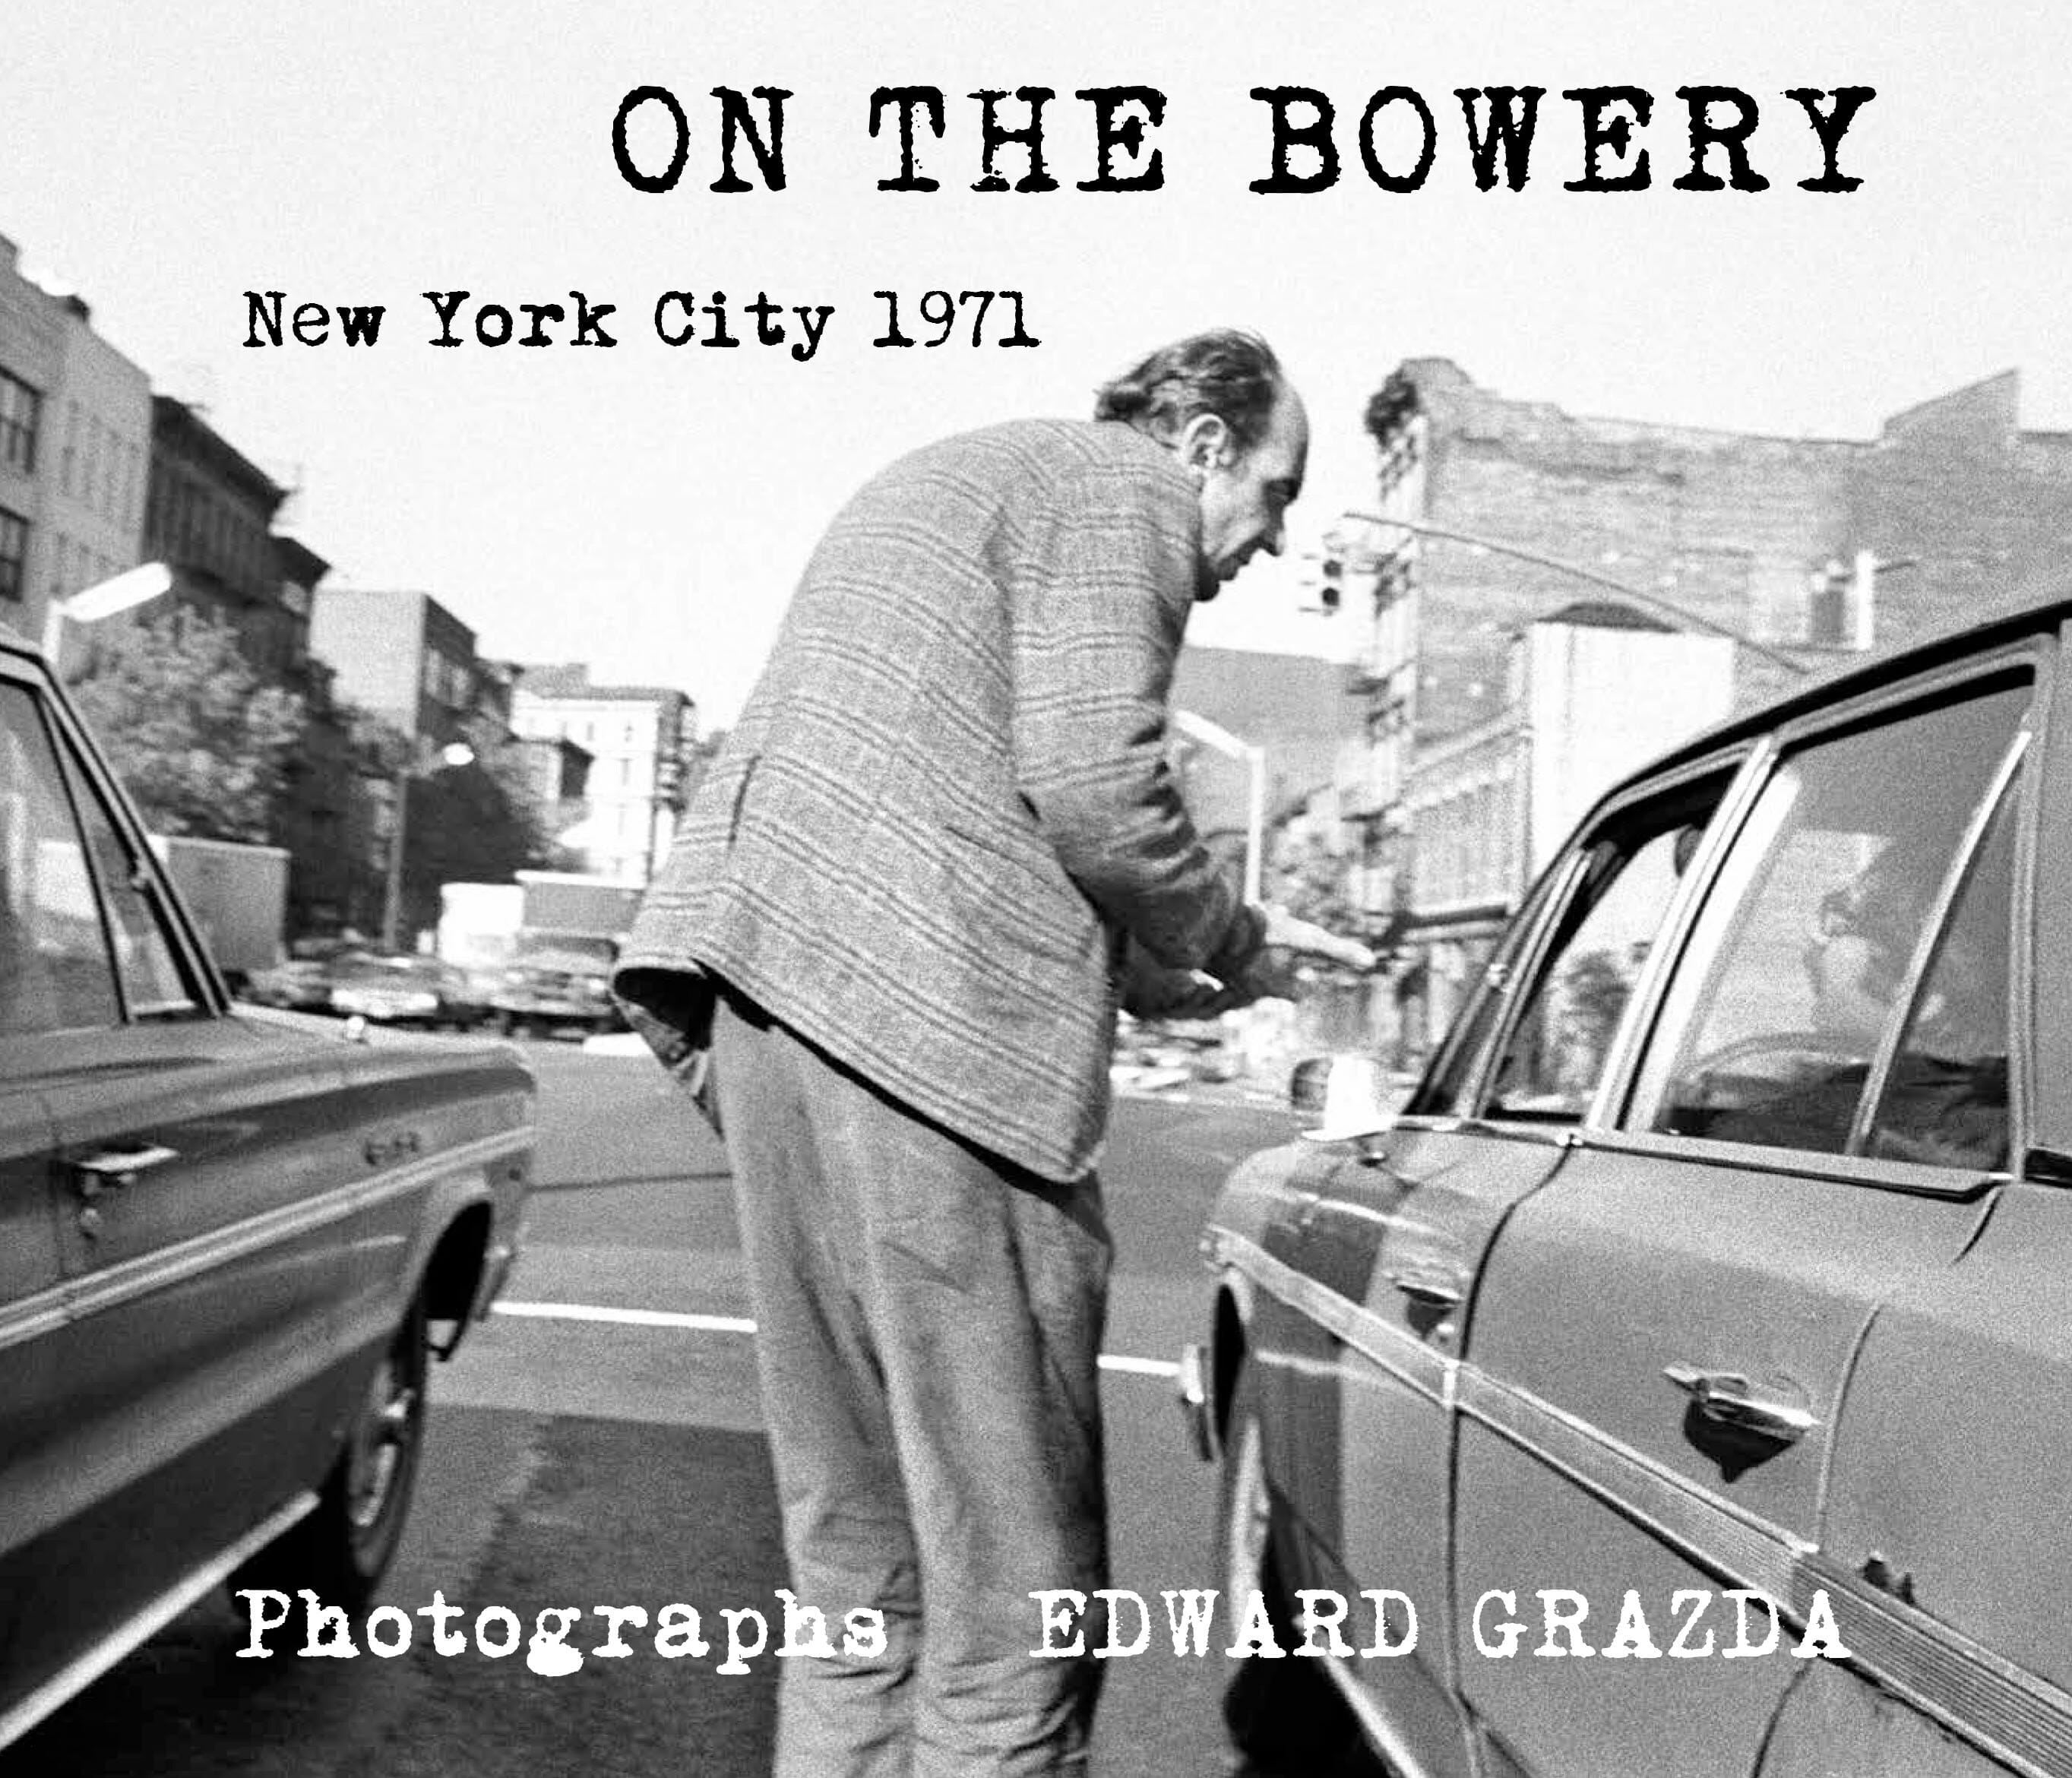 ON THE BOWERY: NEW YORK CITY 1971